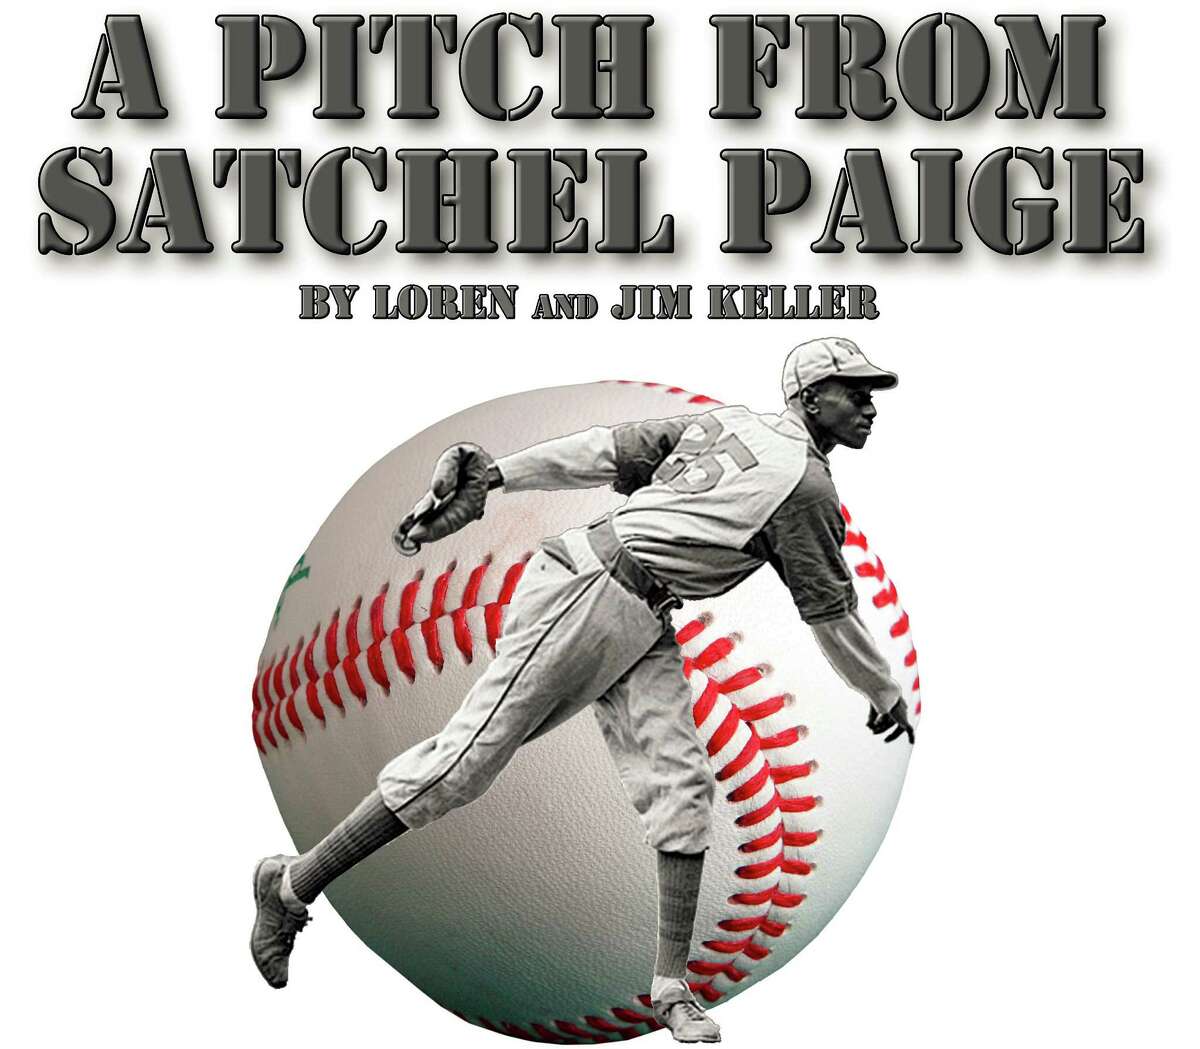 Now pitching for the Yuma Cubs . . . Satchel Paige!